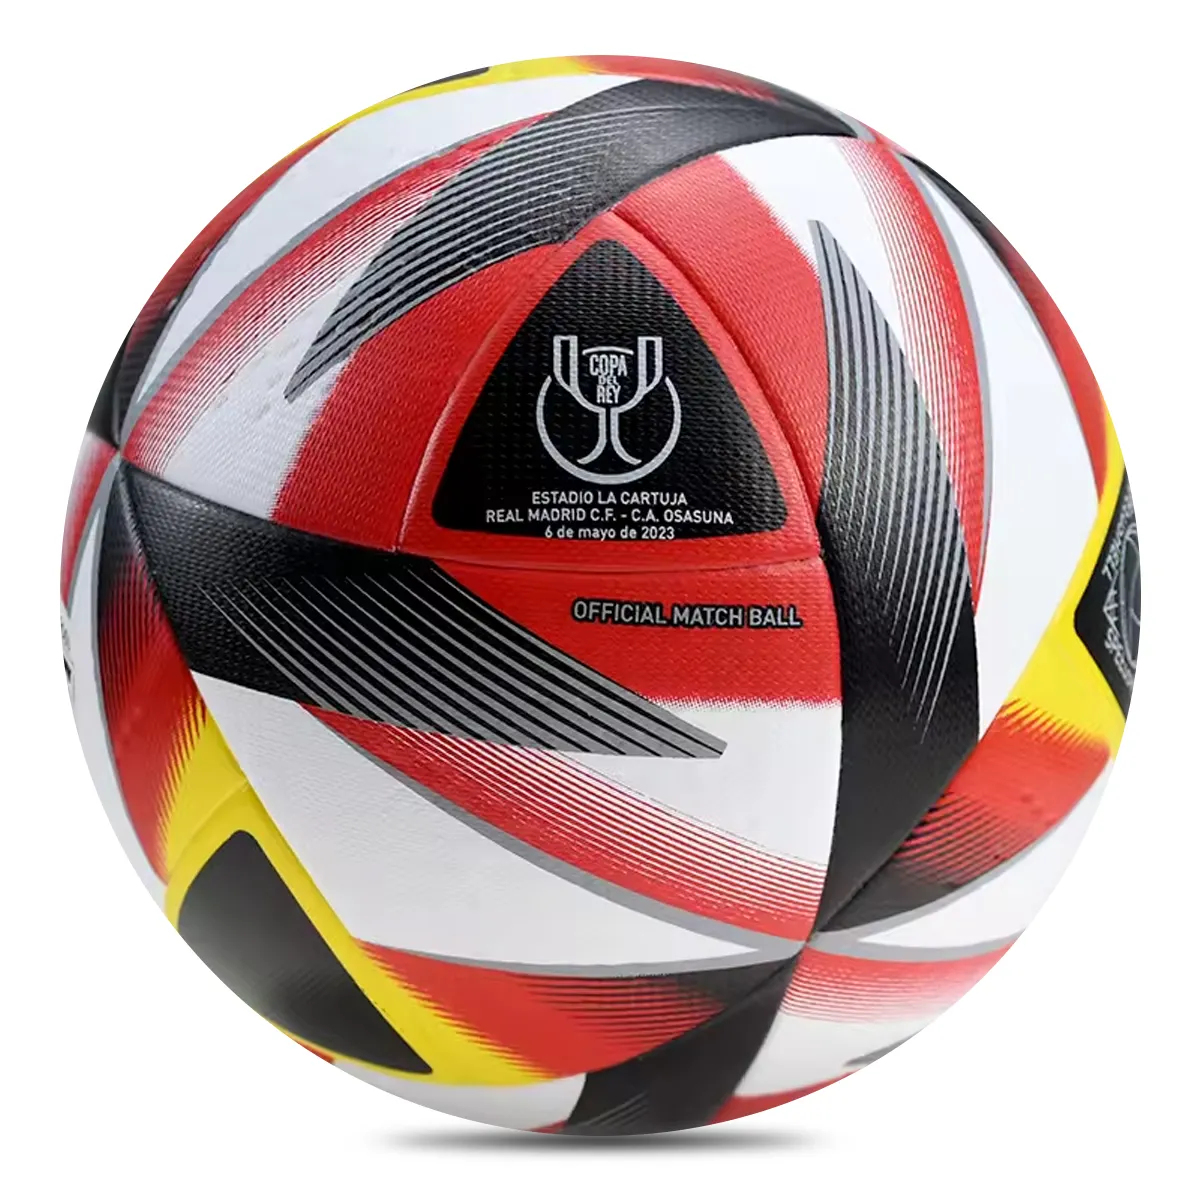 Ultimate Performance Soccer Ball - New Design & New Style - High Quality PU Material - Size 5 - Pro Player Training Soccer Ball